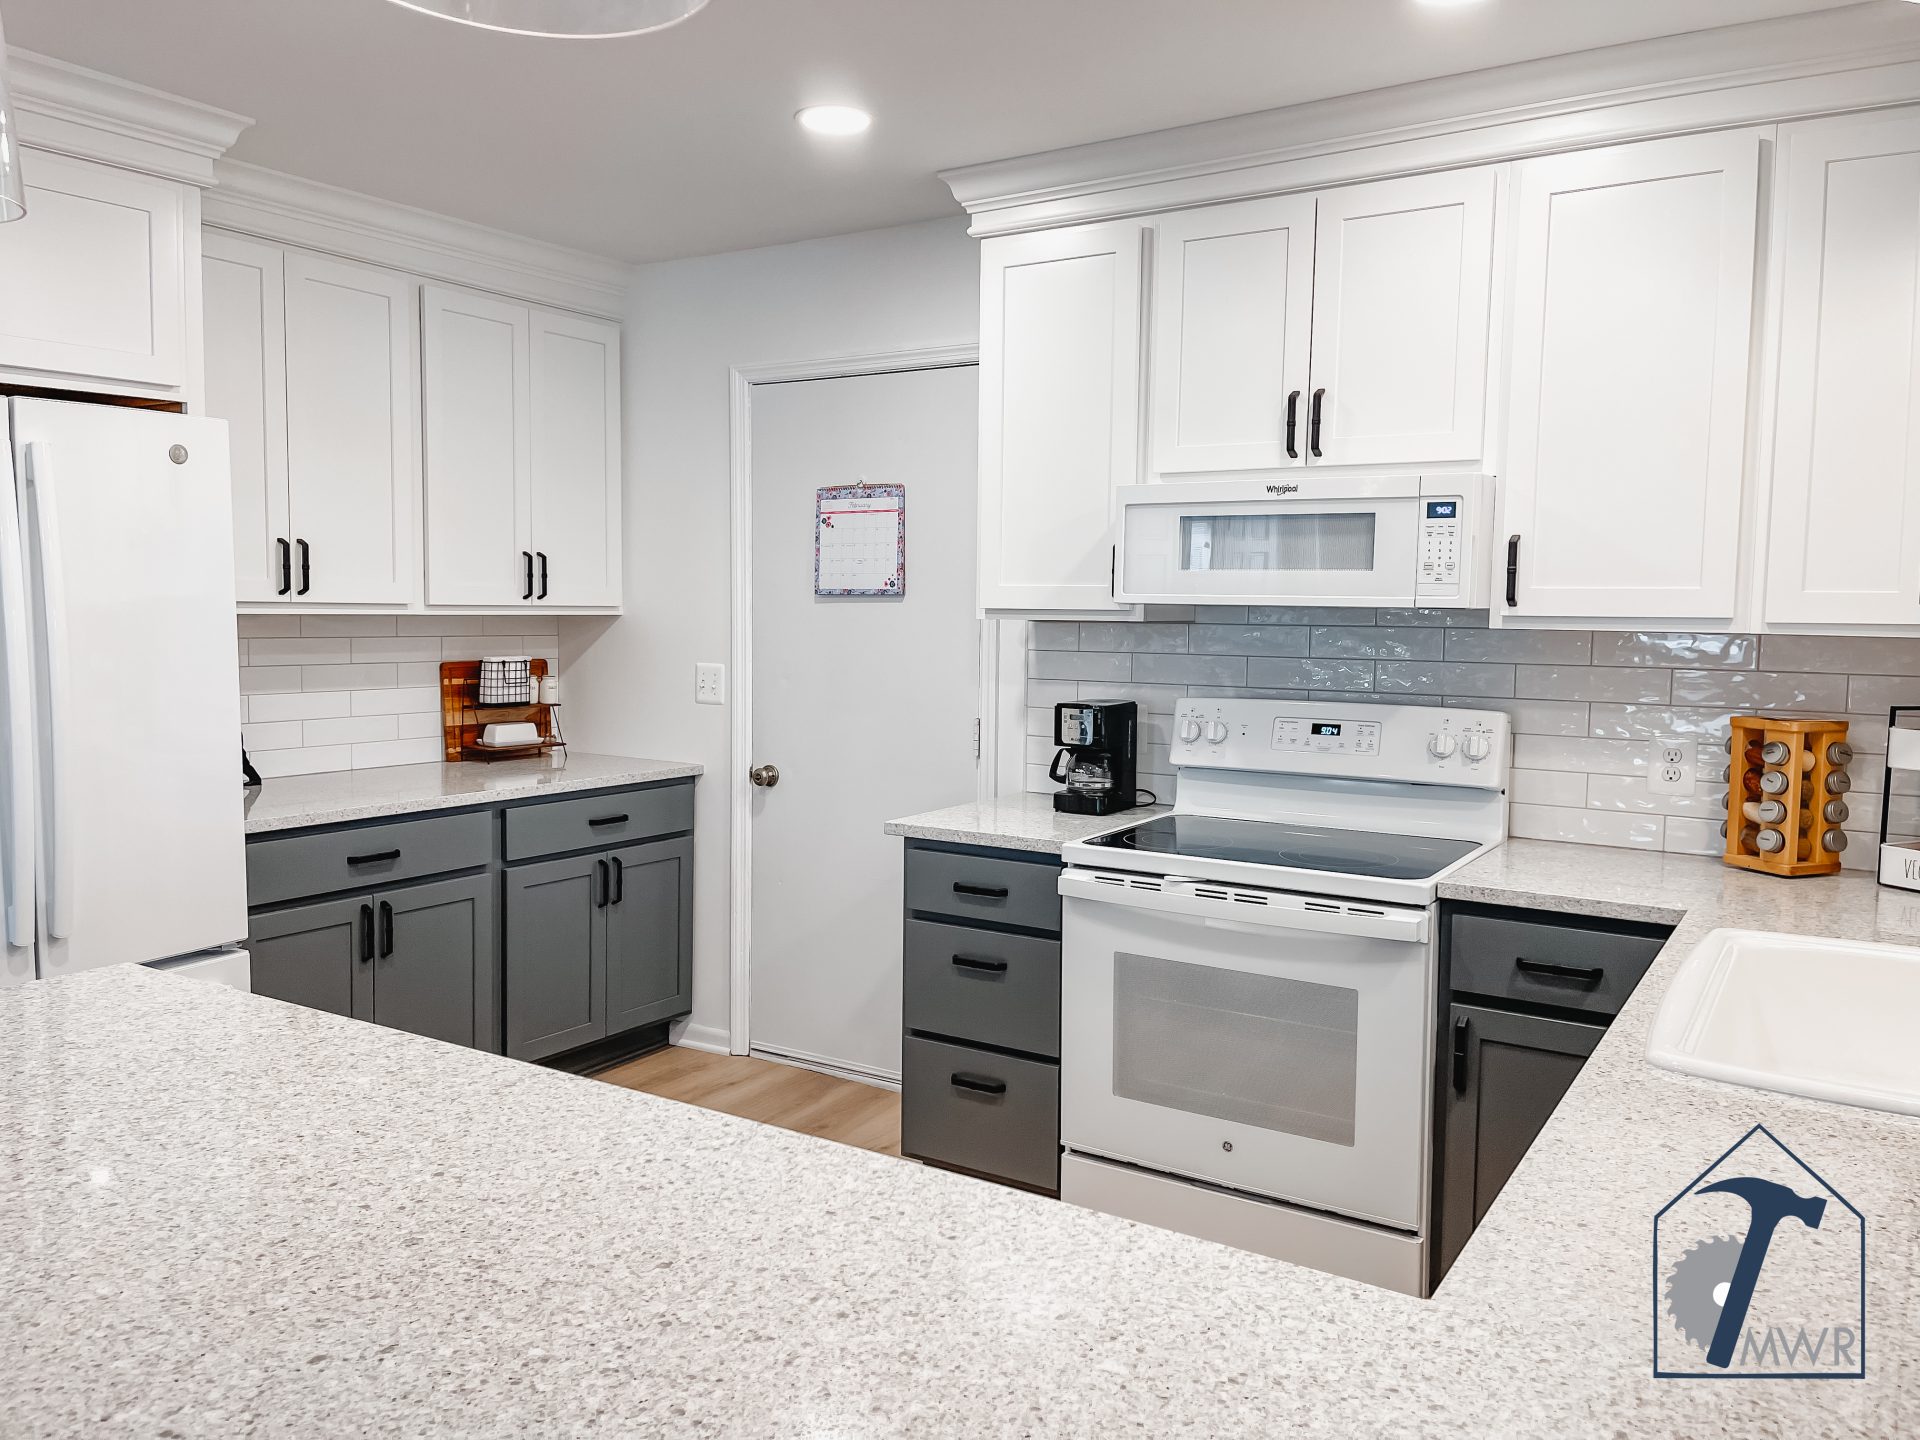 At Midwest Remodel, we bring your dream kitchen to life.